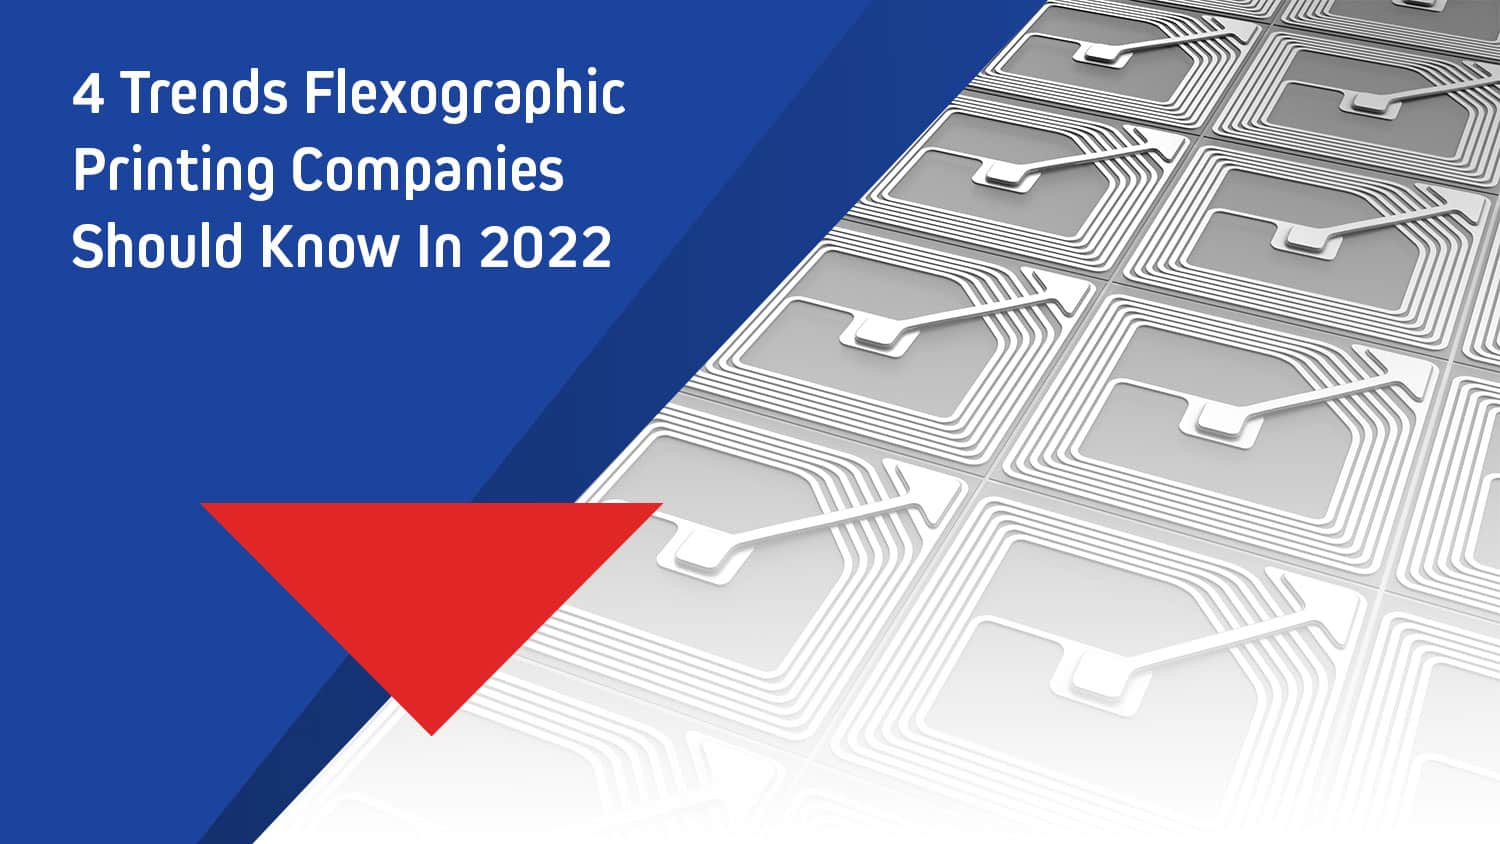 4 Flexographic Printing Trends in 2022